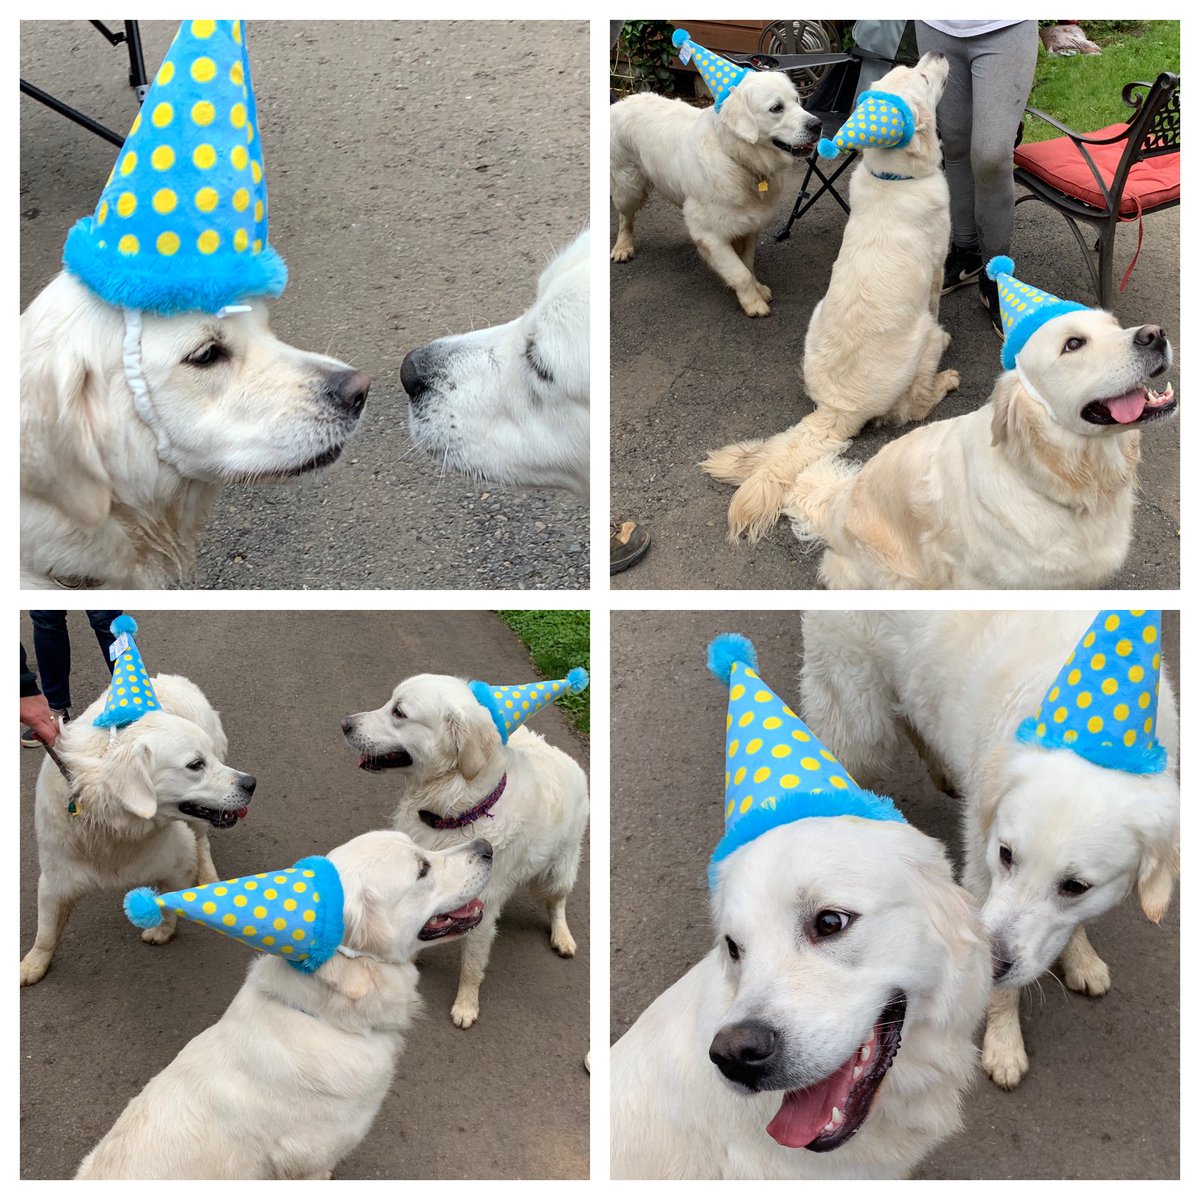 You know you wanted to be at this birthday party! @CuteEmergency @GoldenretrieversUS @mydogiscutest @dog_rates          #dogcelebration #dogsoftwitter #weekendsmiles #MickeyIsSoFine